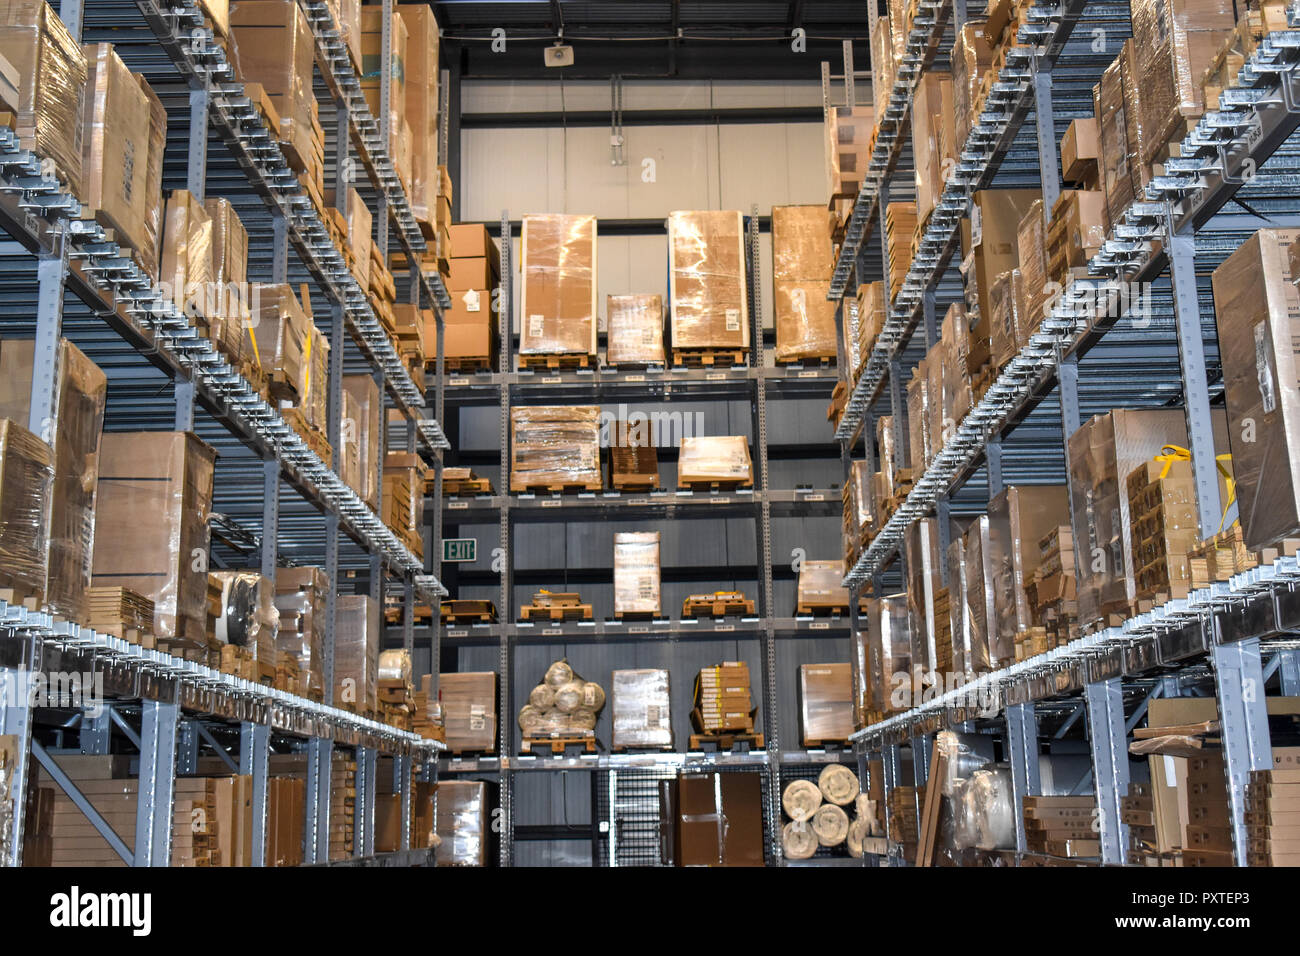 Warehouse photo with boxes Stock Photo